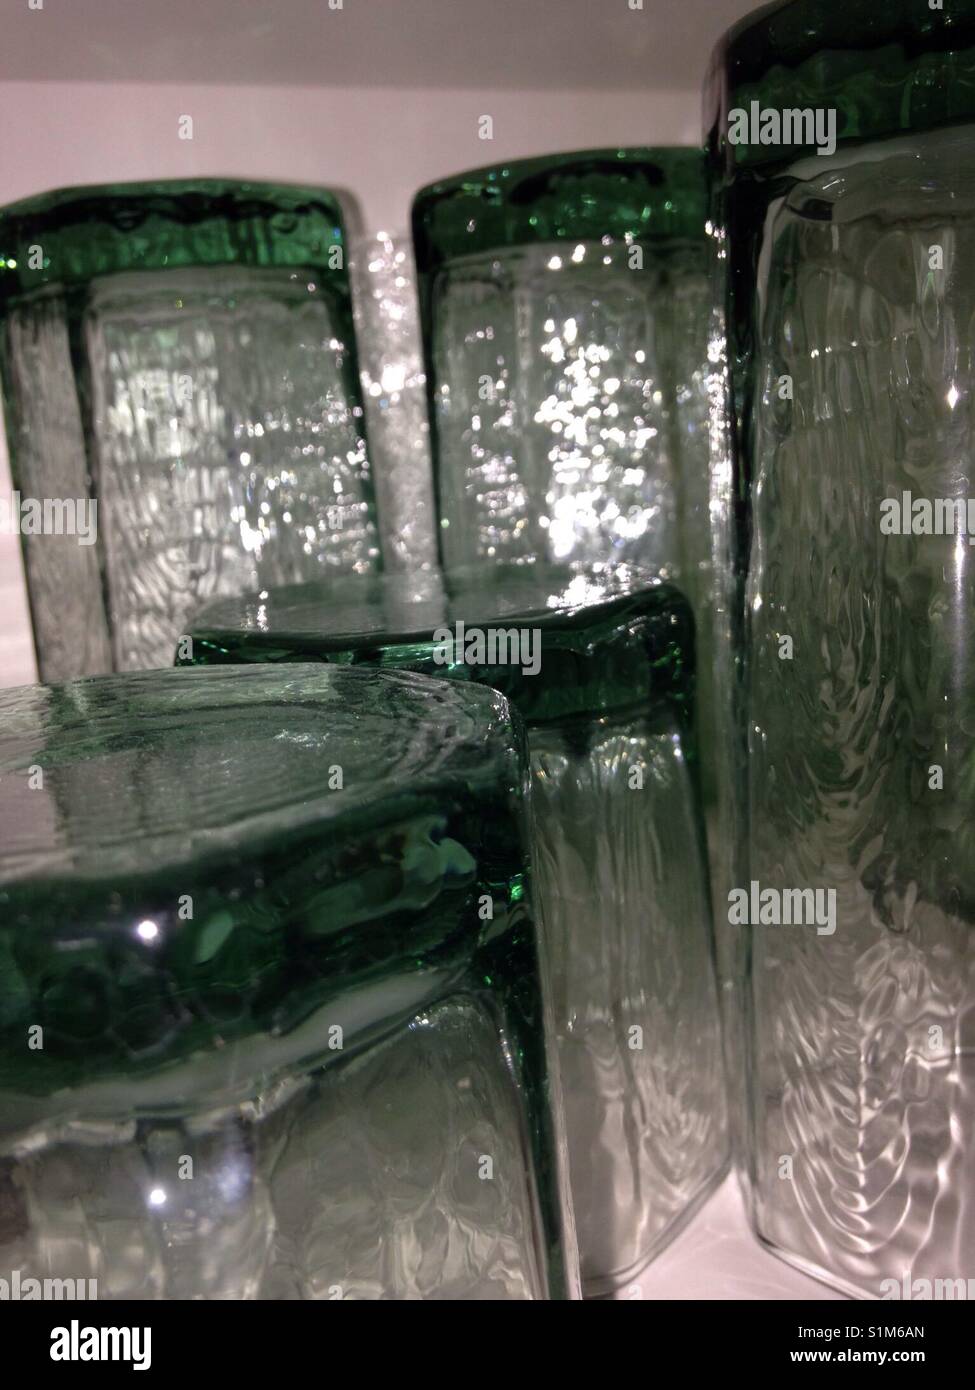 Green drinking glasses in a cabinet. Textured surfaces. Stock Photo